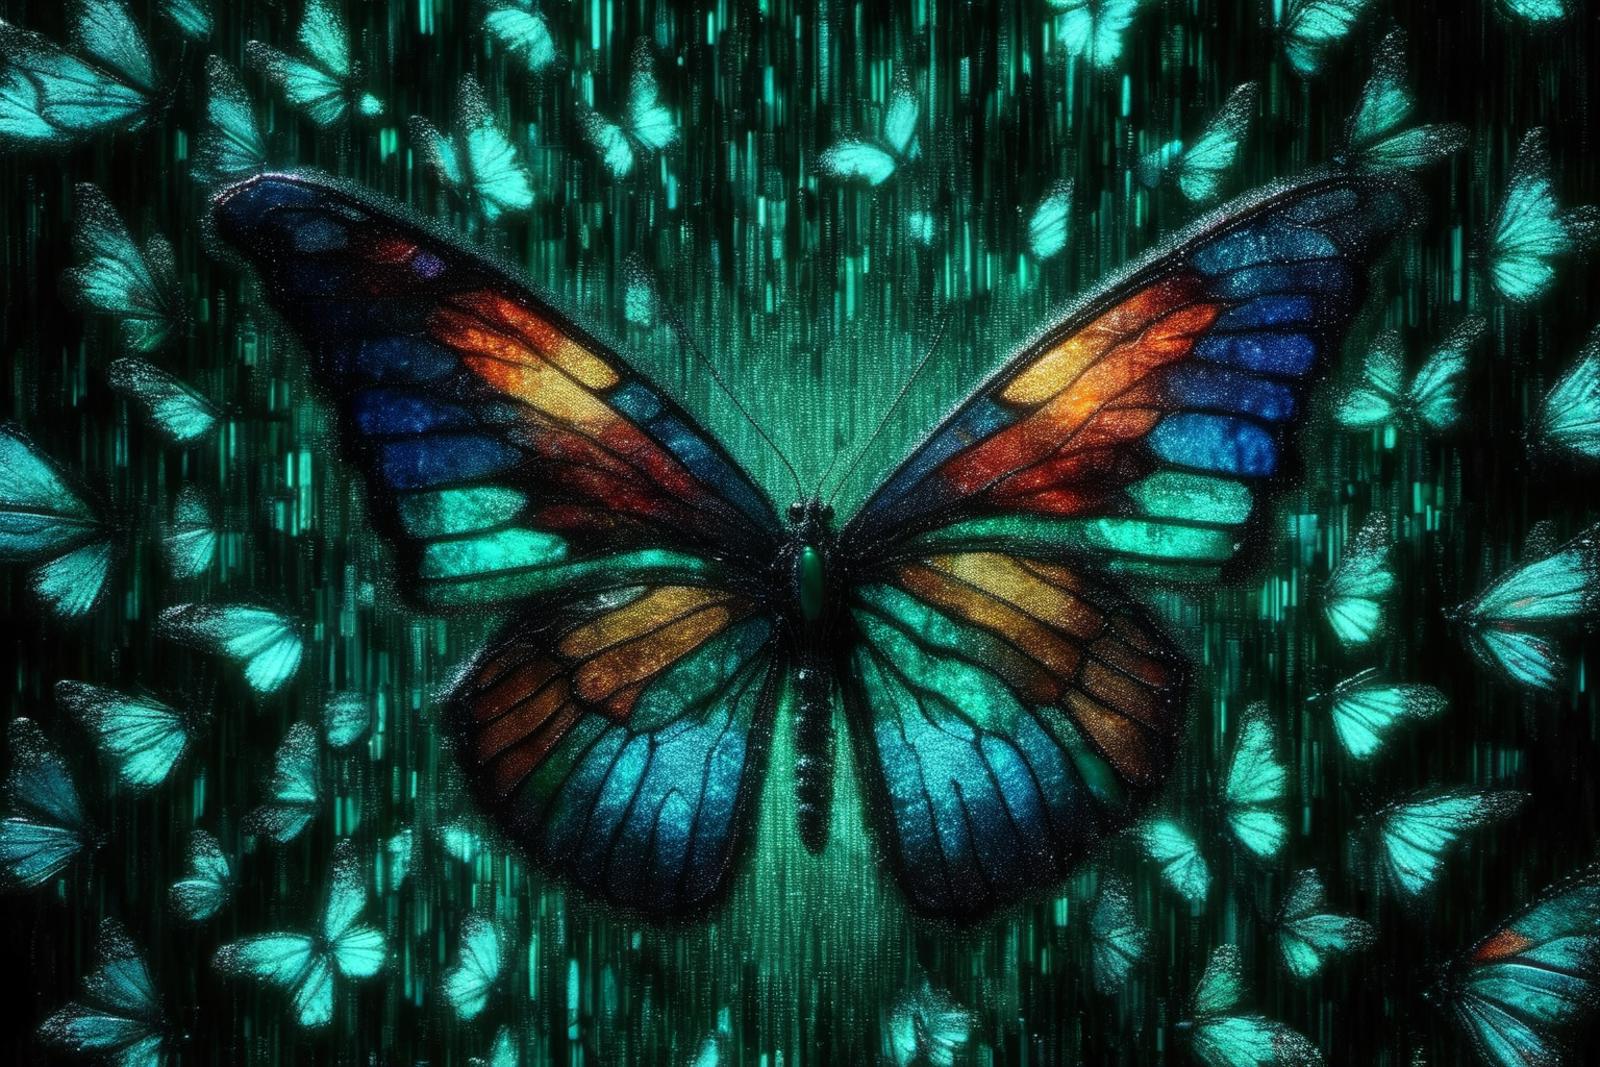 A vibrant butterfly with green, blue, yellow, and orange wings is sitting in front of a green background. The wings of the butterfly are colorful and iridescent, creating a visually striking scene.